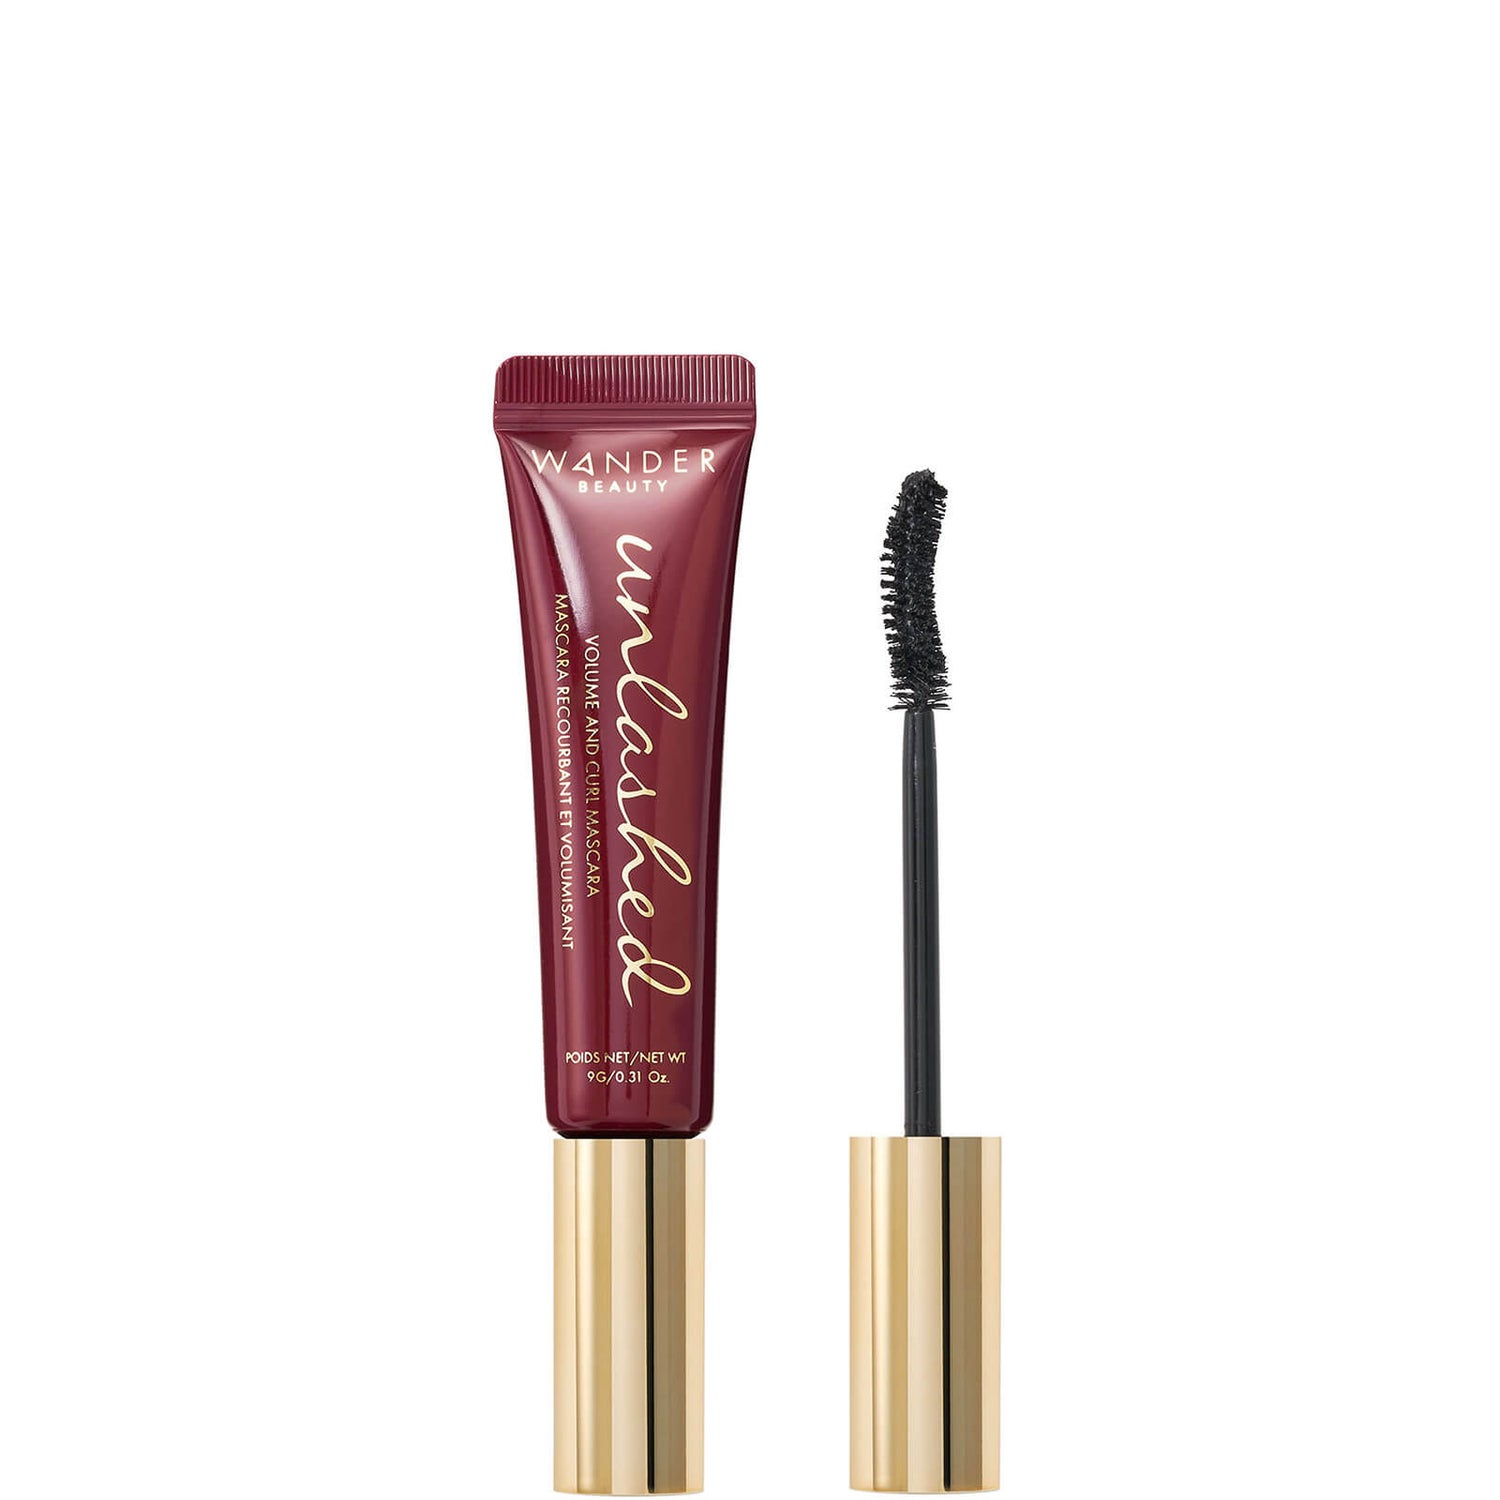 Wander Beauty Unlashed Volume and Curl Mascara (0.32 oz.)